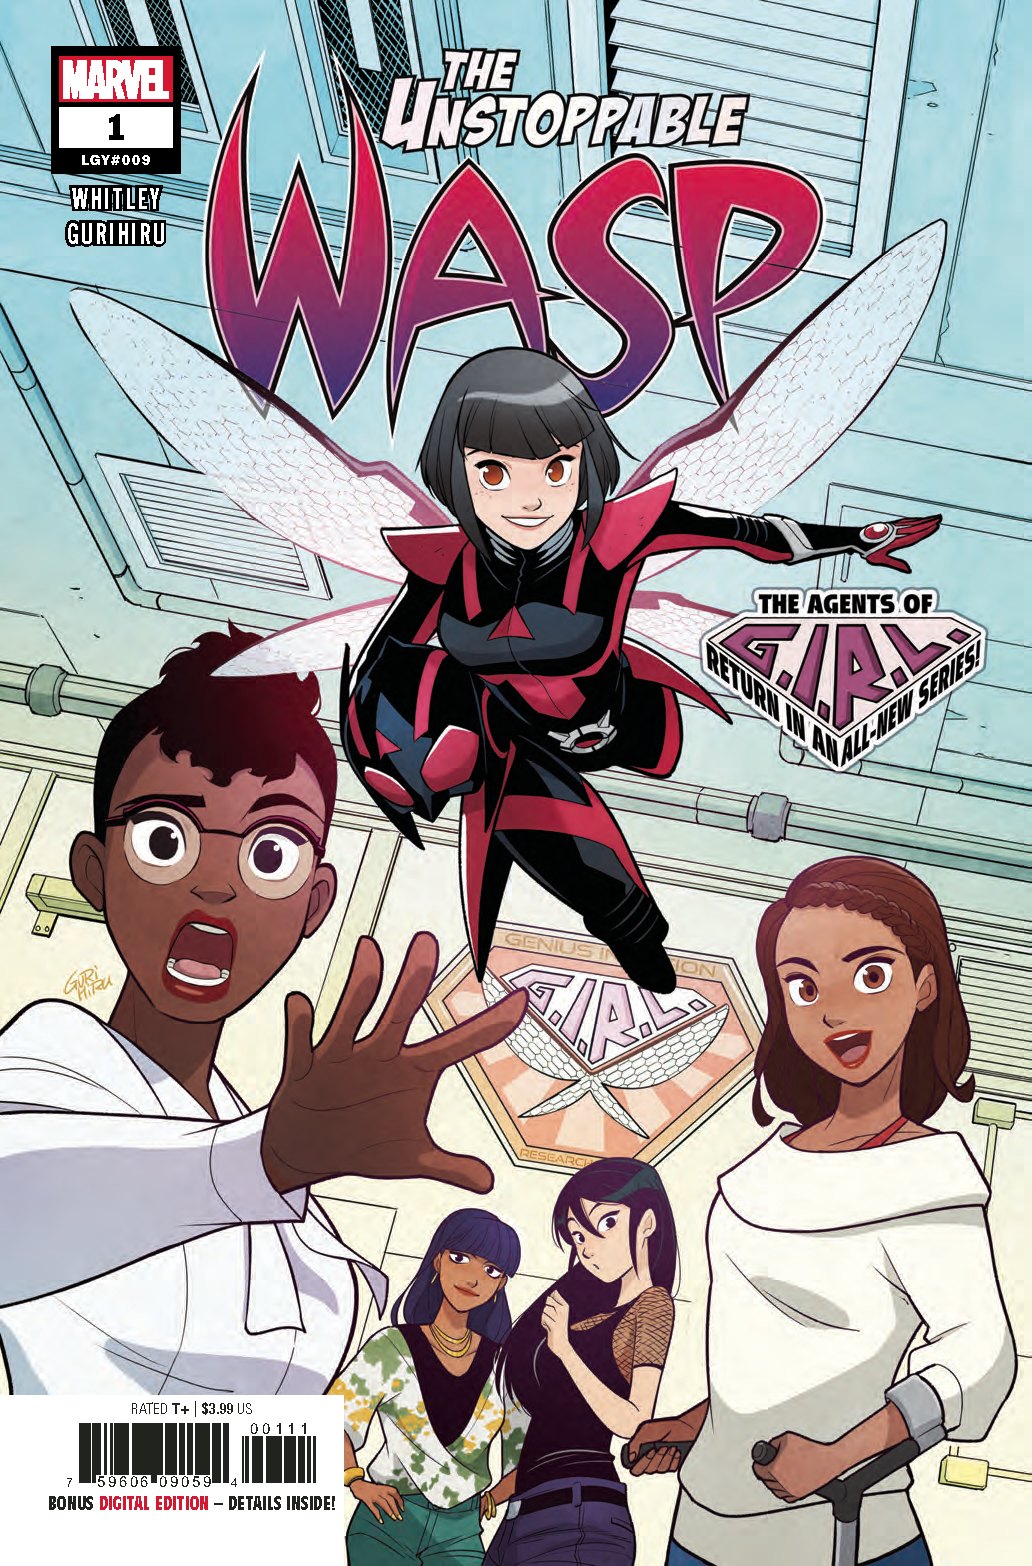 UNSTOPPABLE WASP #1